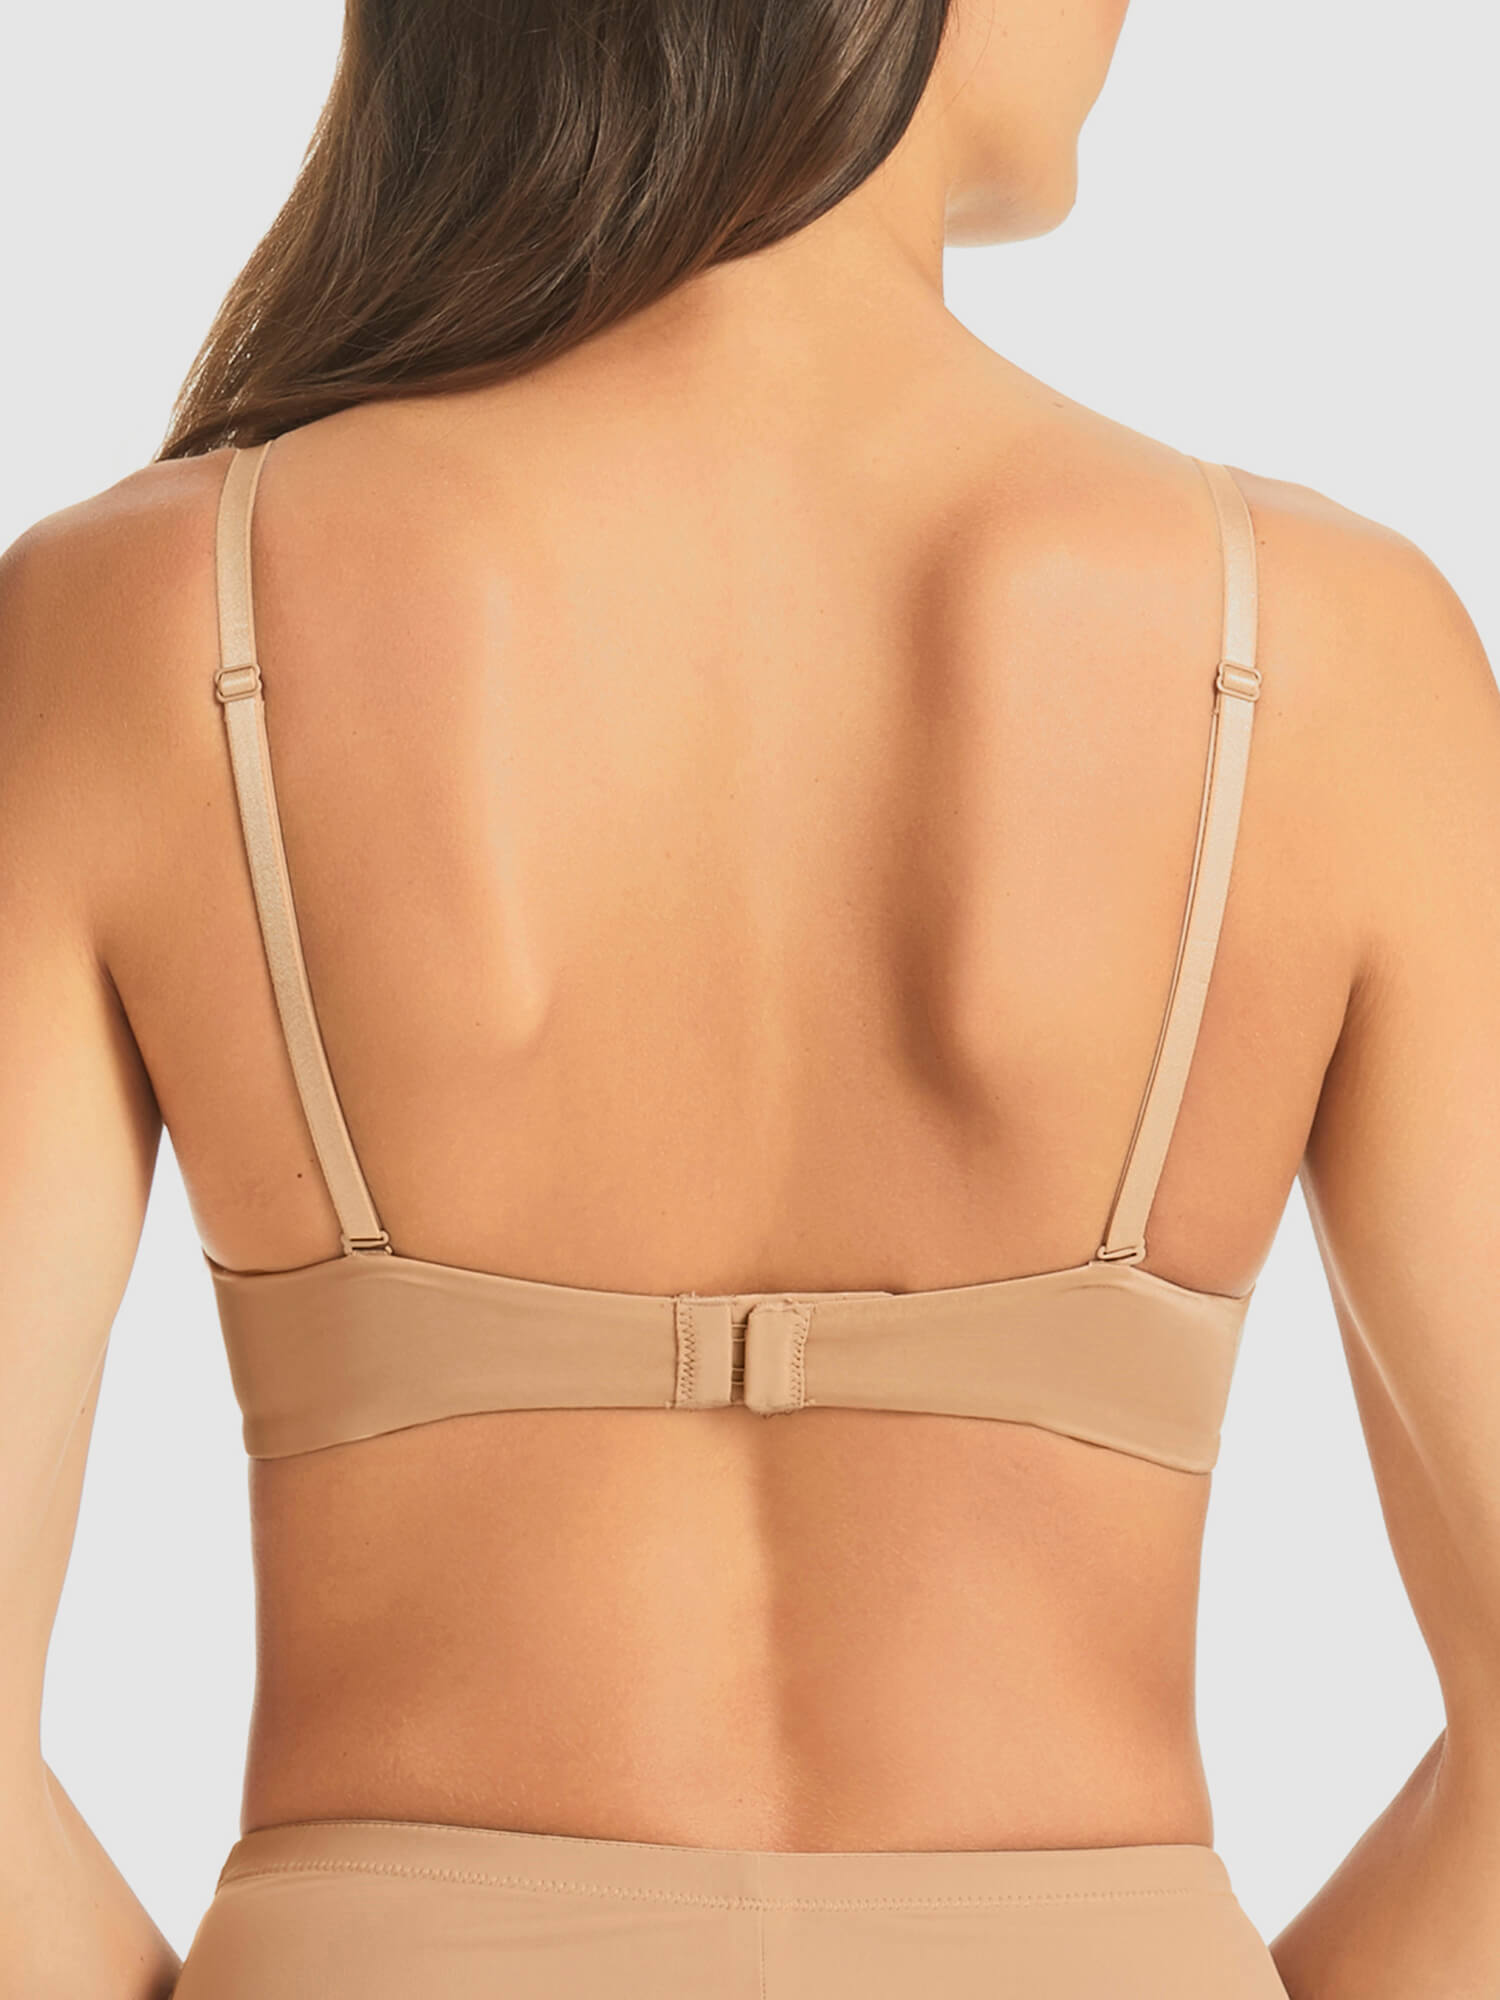 The $10 Secret to Wearing a Low-Back Top Without Your Bra Showing